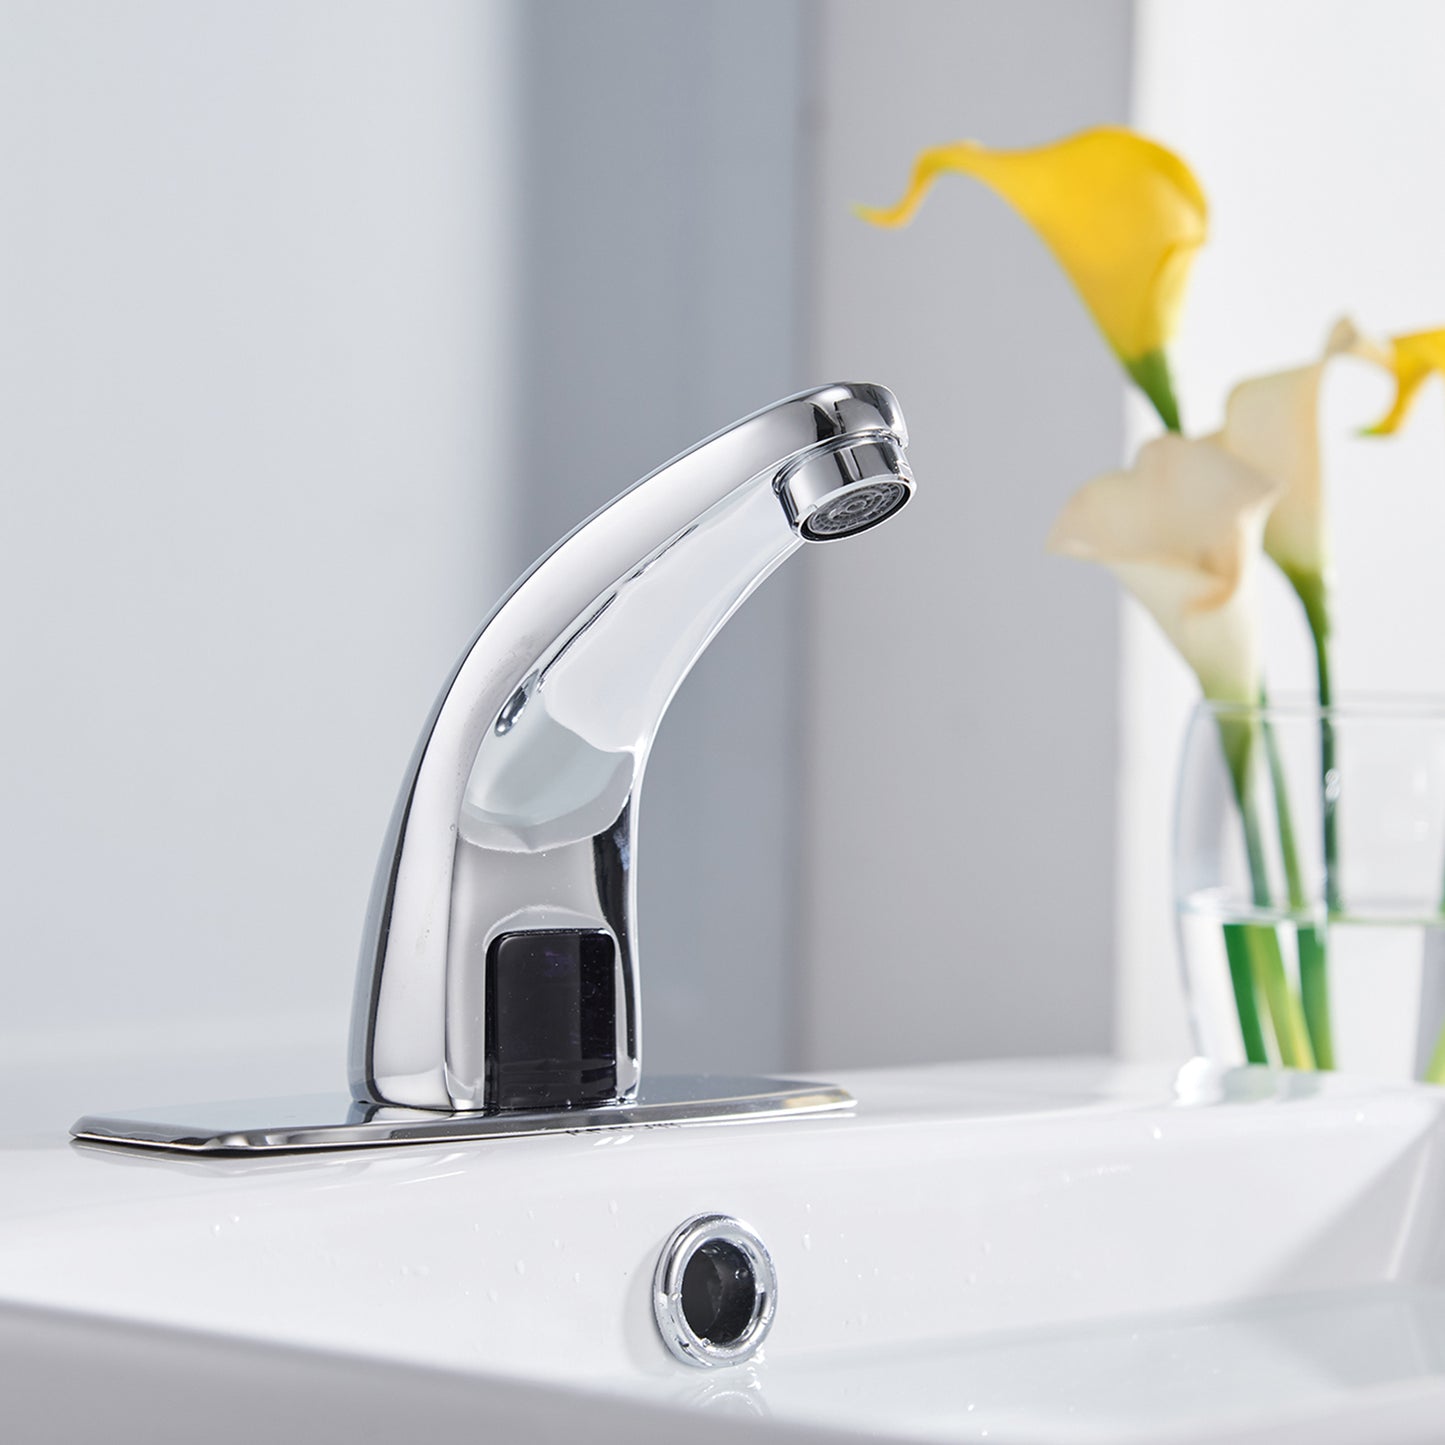 Automatic Chrome Bathroom Faucet with Touchless Technology and Deck Plate